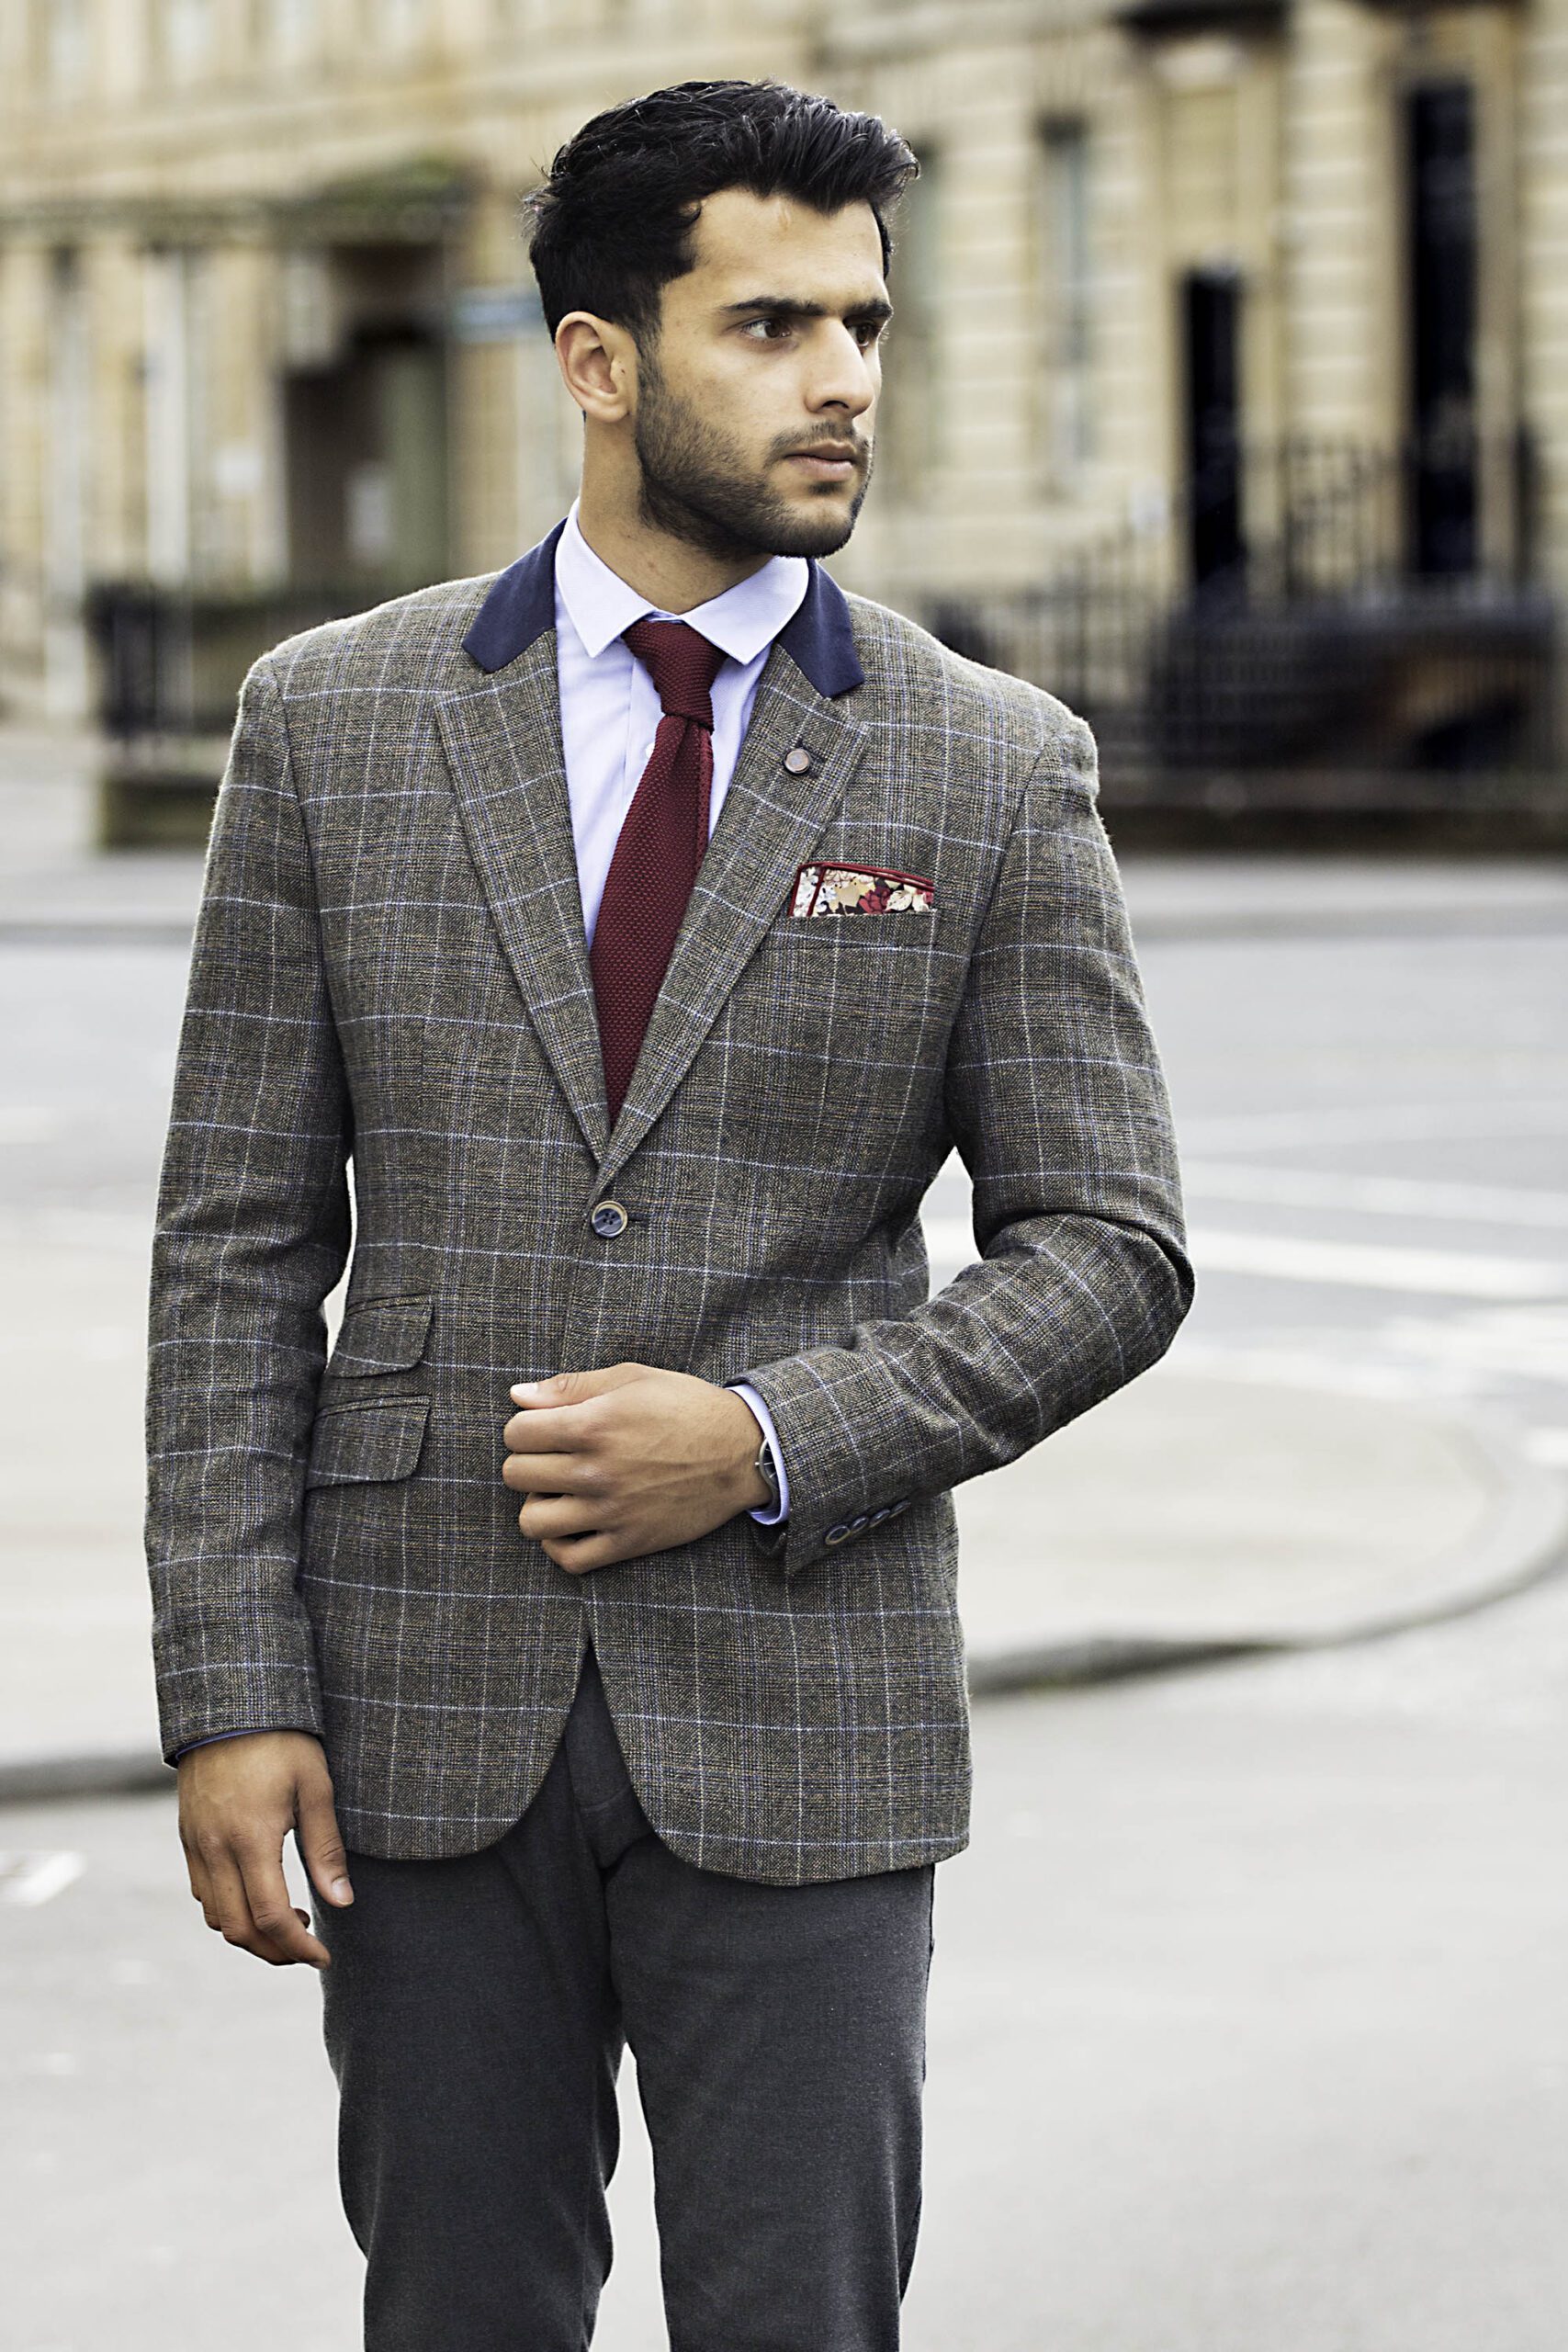 The Lavender Tie and Clover Pocket Square